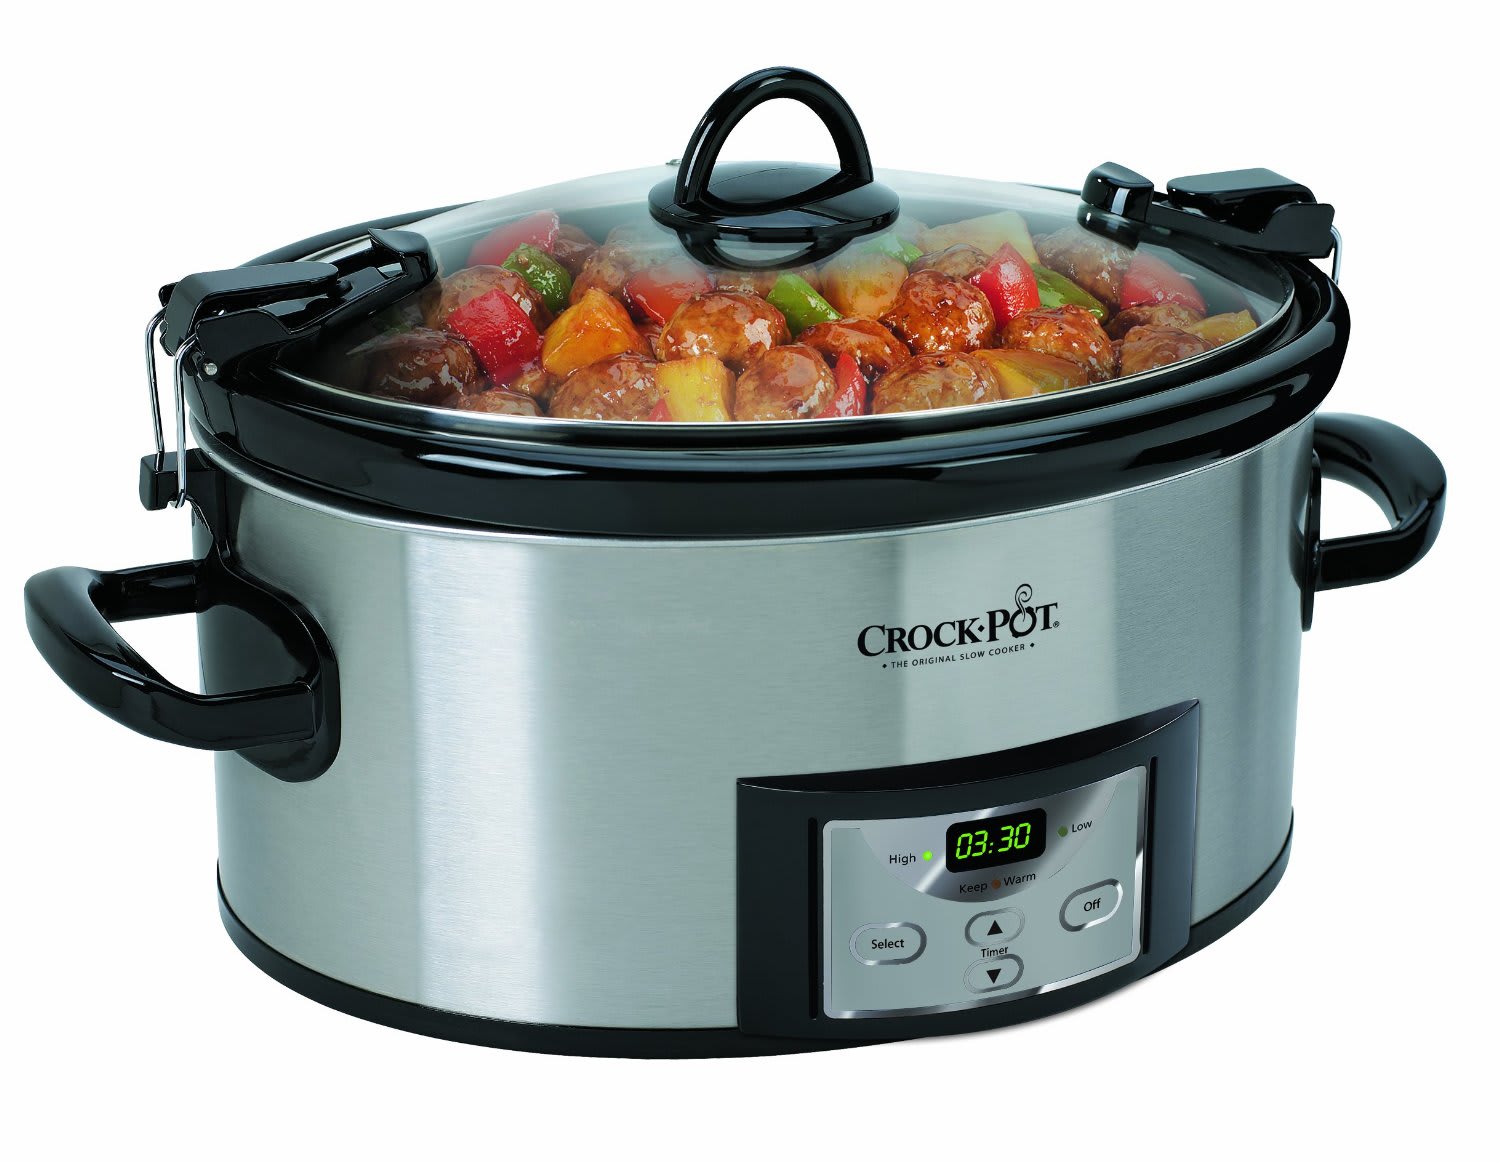 https://media-cldnry.s-nbcnews.com/image/upload/newscms/2017_31/1269633/crock-pot-cook-carry-slow-cooker-today-20170802.jpg